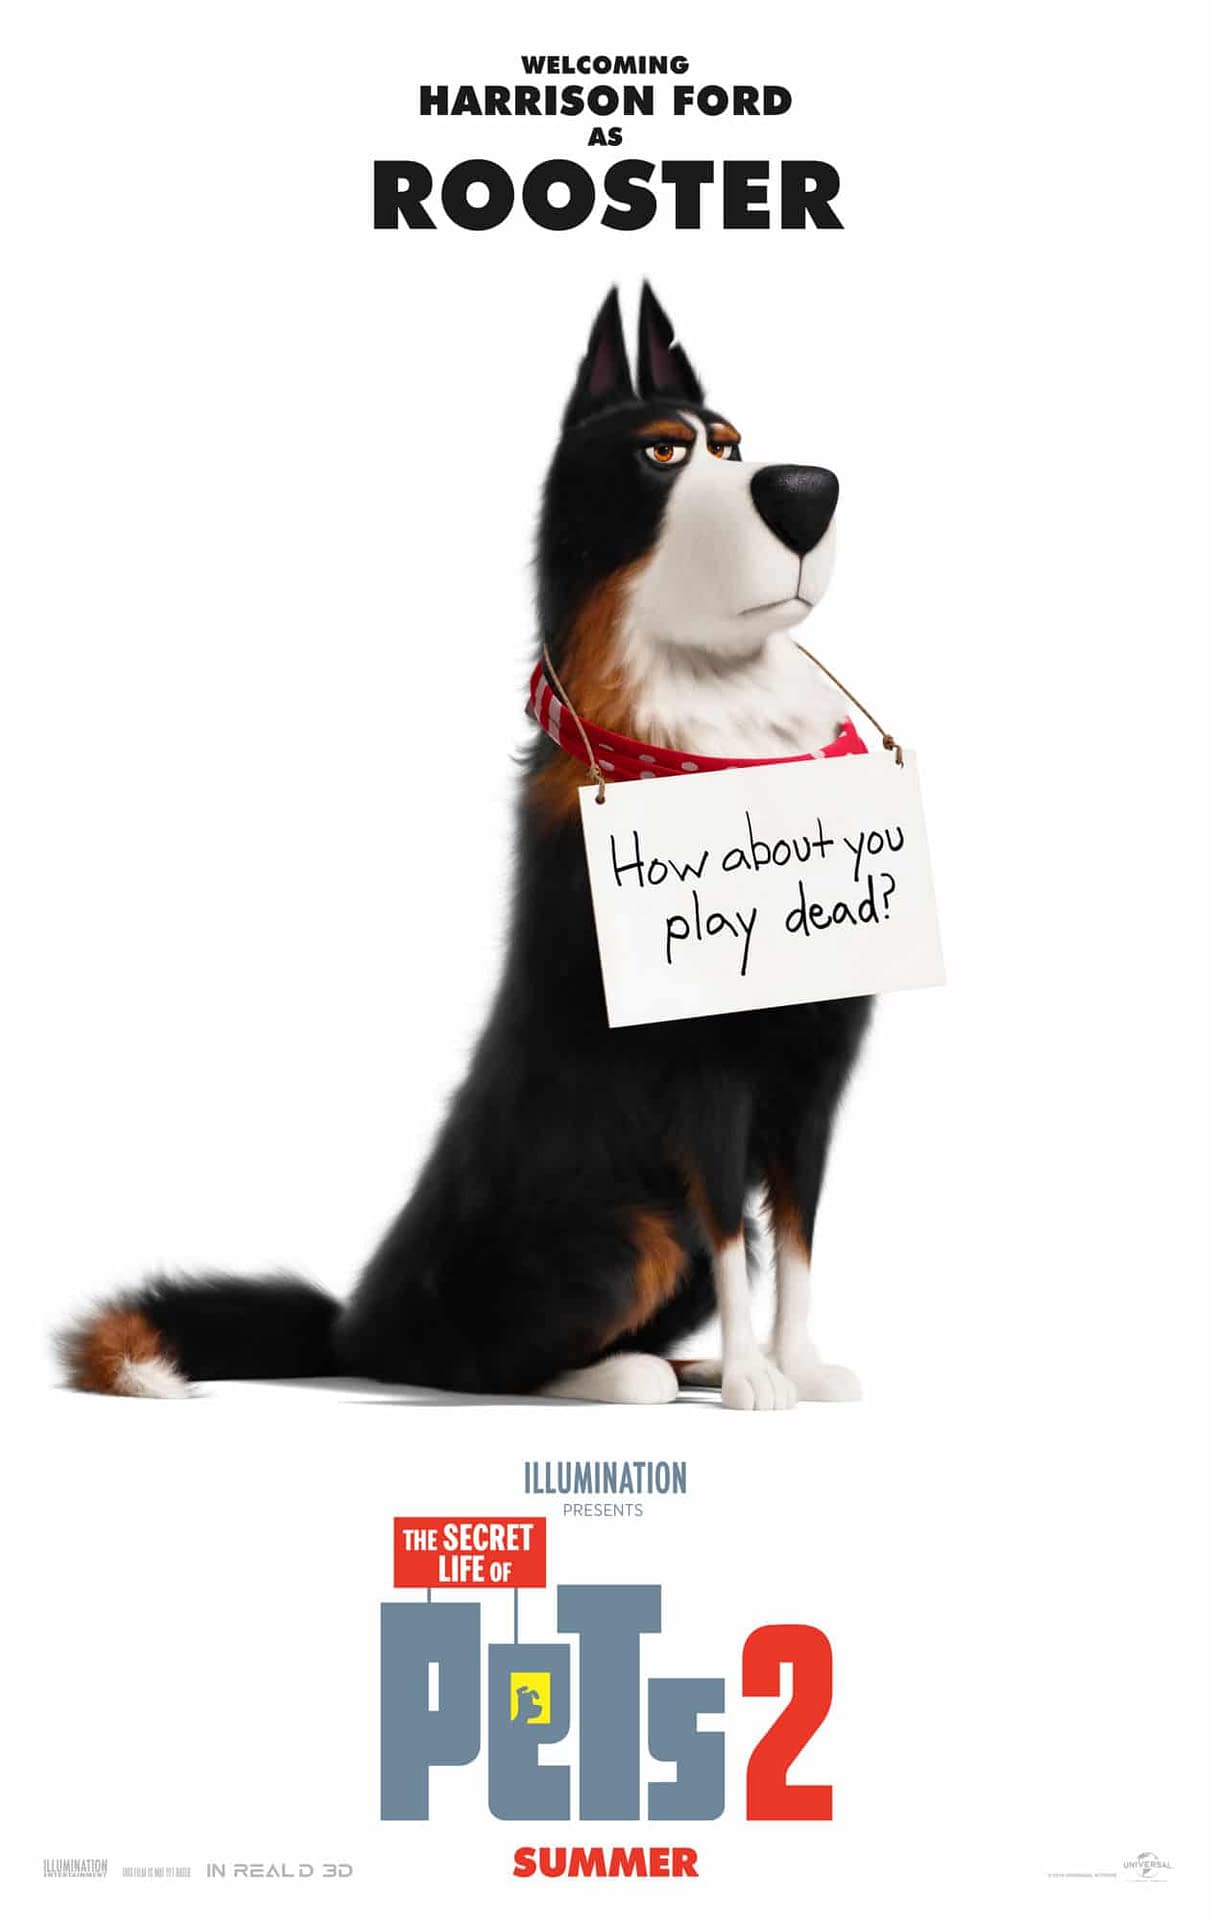 Meet Harrison Ford as Rooster in This New the Secret Life of Pets 2 Trailer and Poster